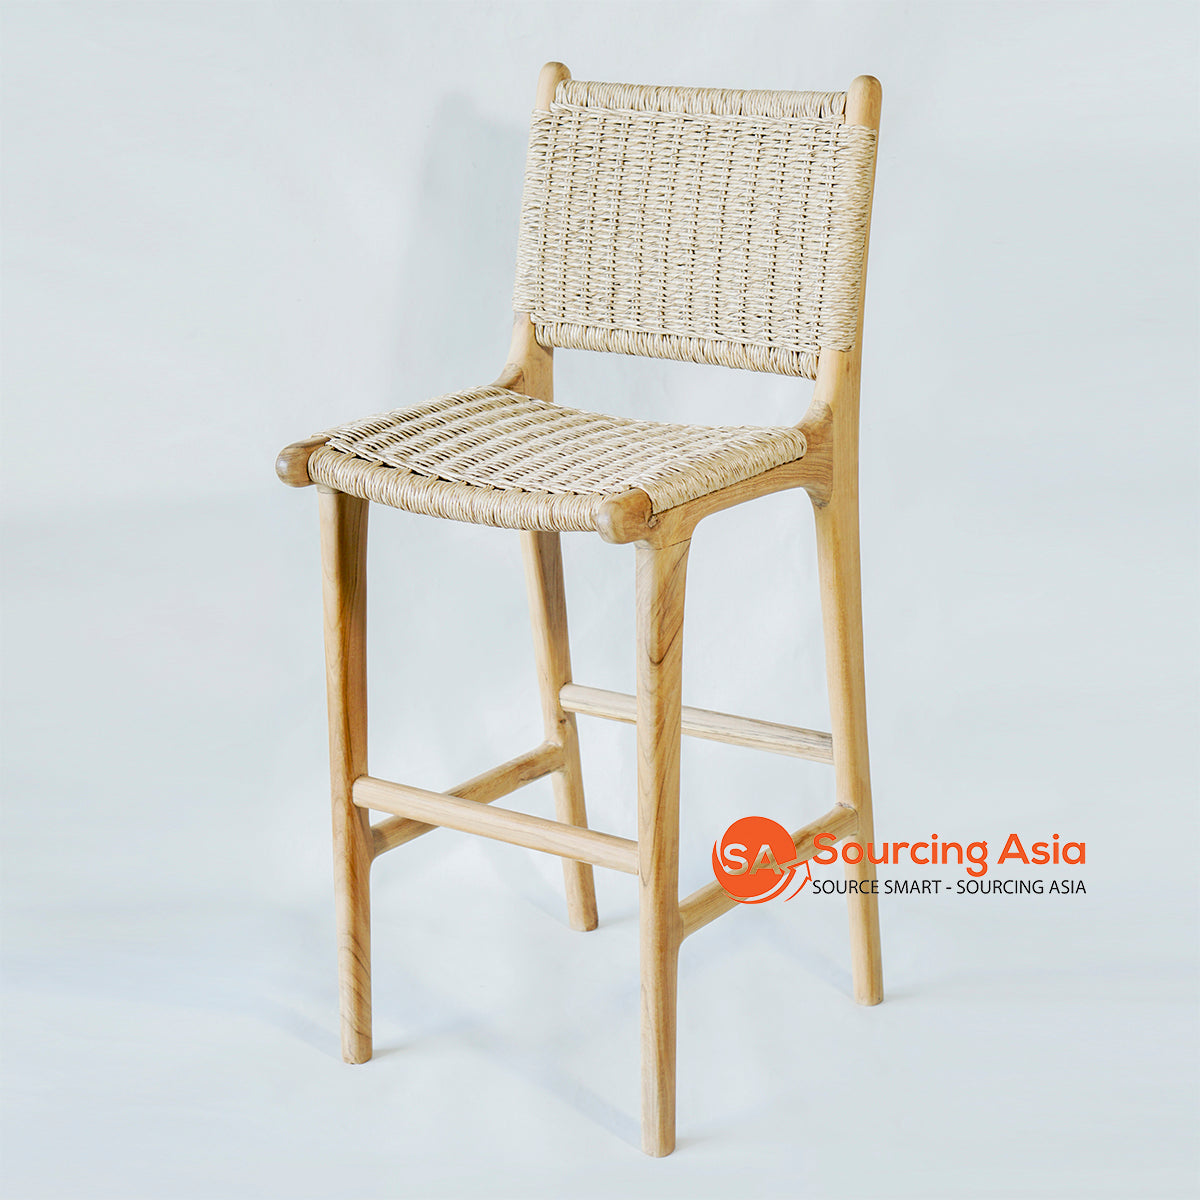 IJF001-65 TROPICAL STOOL WITH BACK 65CM TO SEAT WITH VERO WEAVE